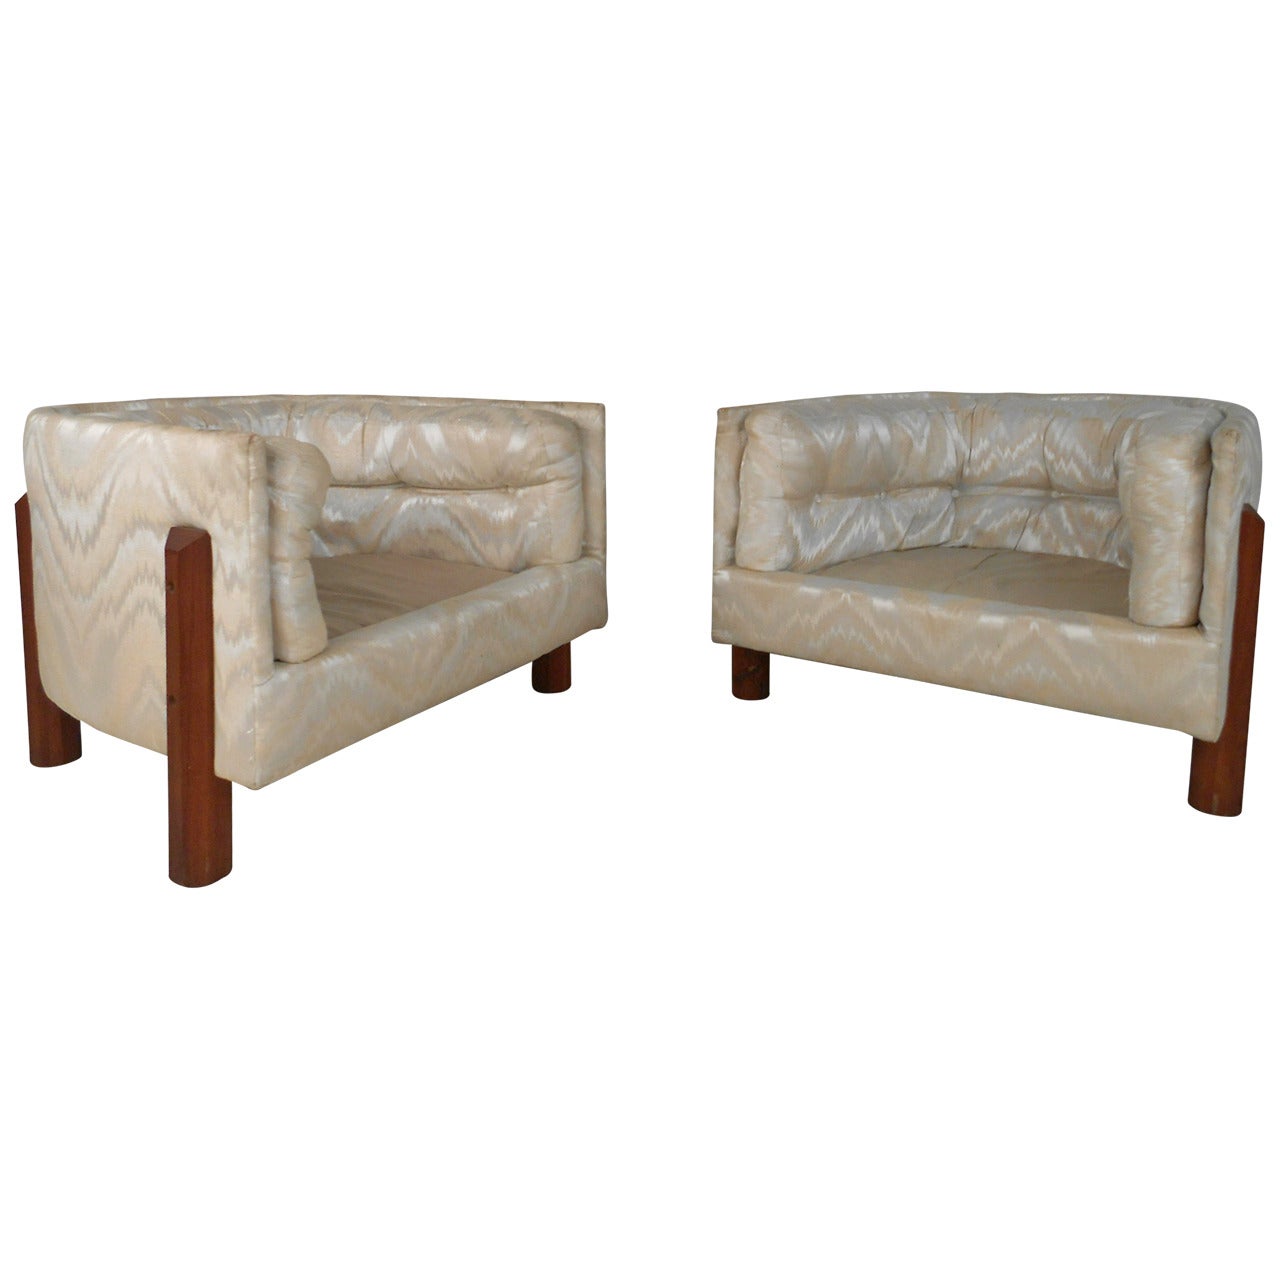 Pair of Unique Tufted Mid-Century Modern Barrel Back Chairs